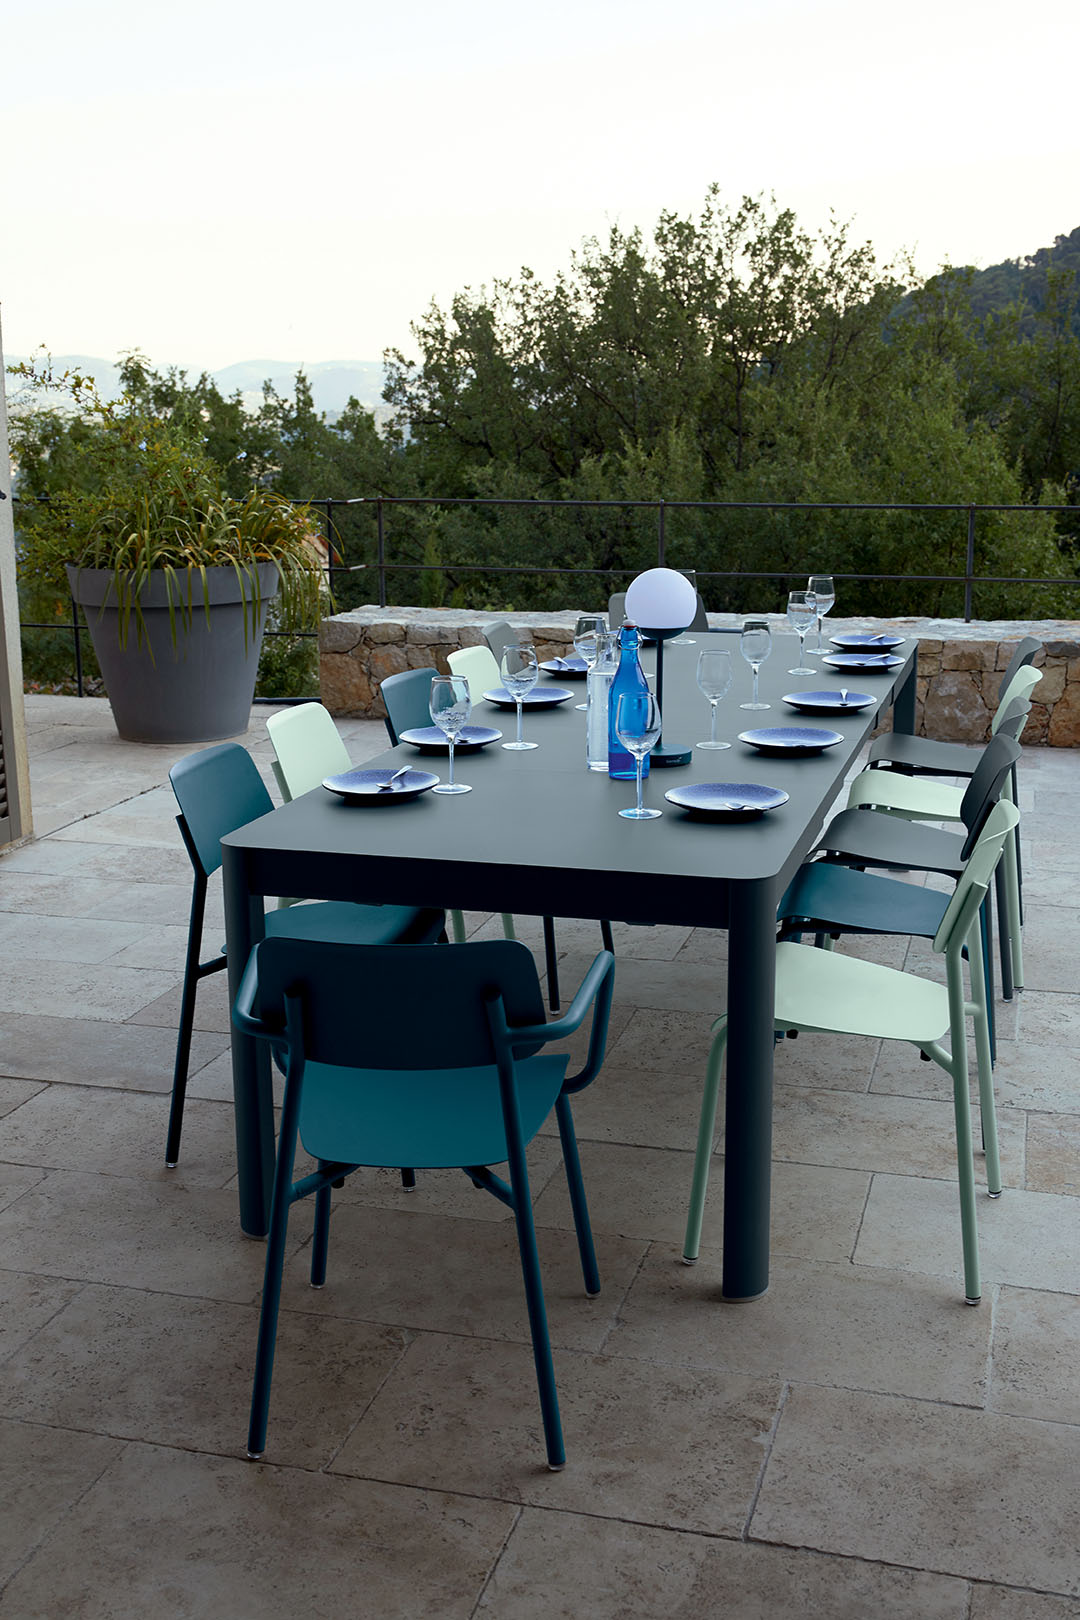 table de jardin, table metal, table 12 personnes, table de jardin a rallonge, table allonge, fermob, garden table, metal table, table for 12 people, garden table with extension, extension table